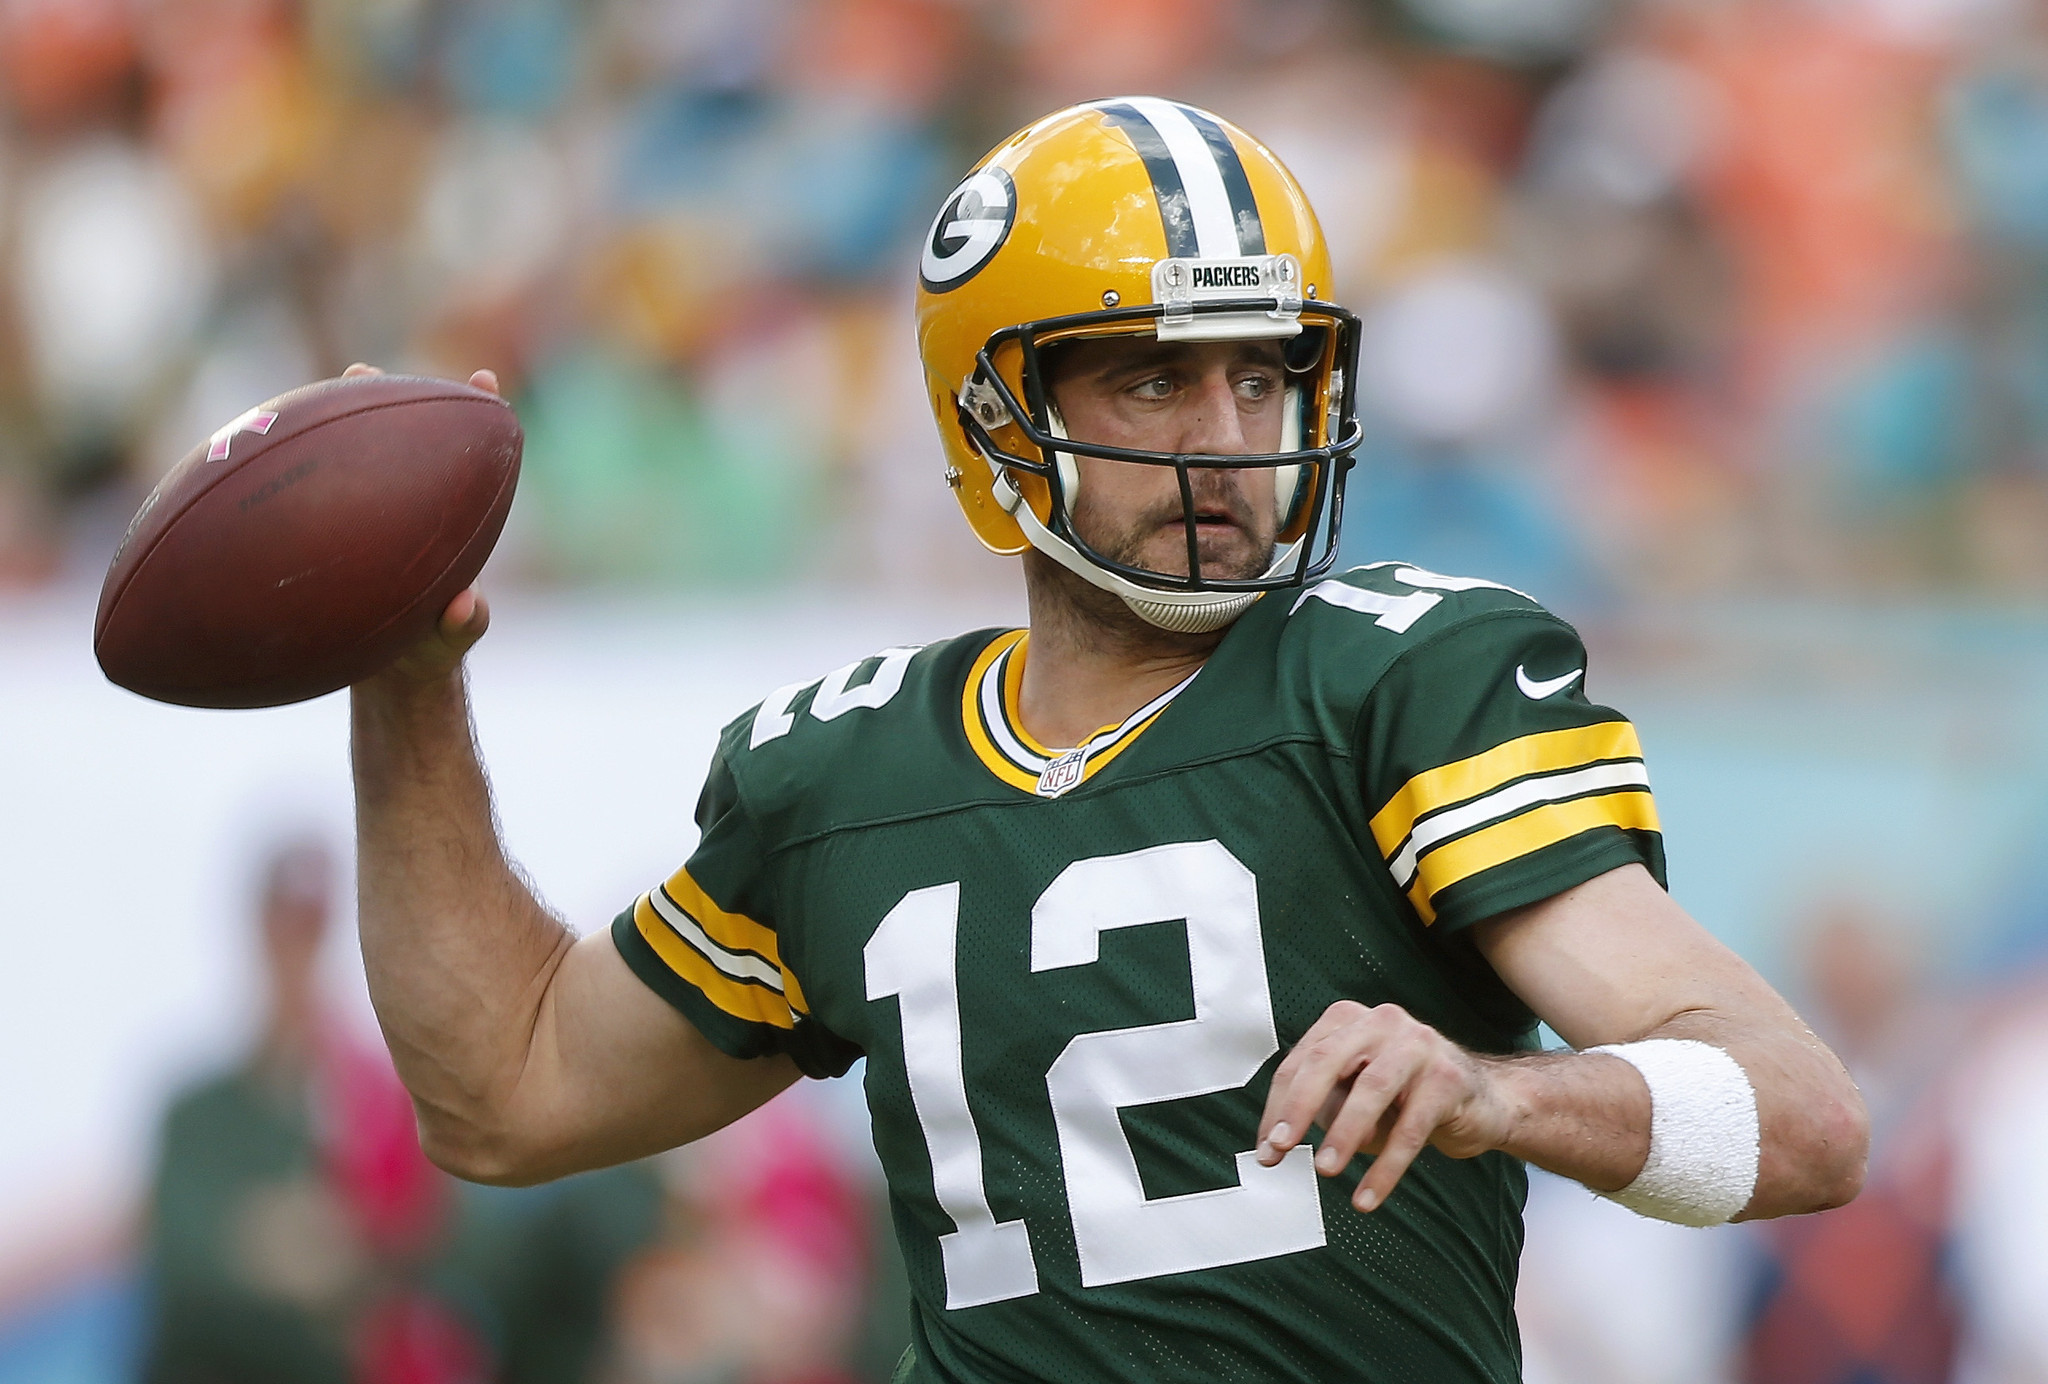 What is Aaron Rodgers worth?